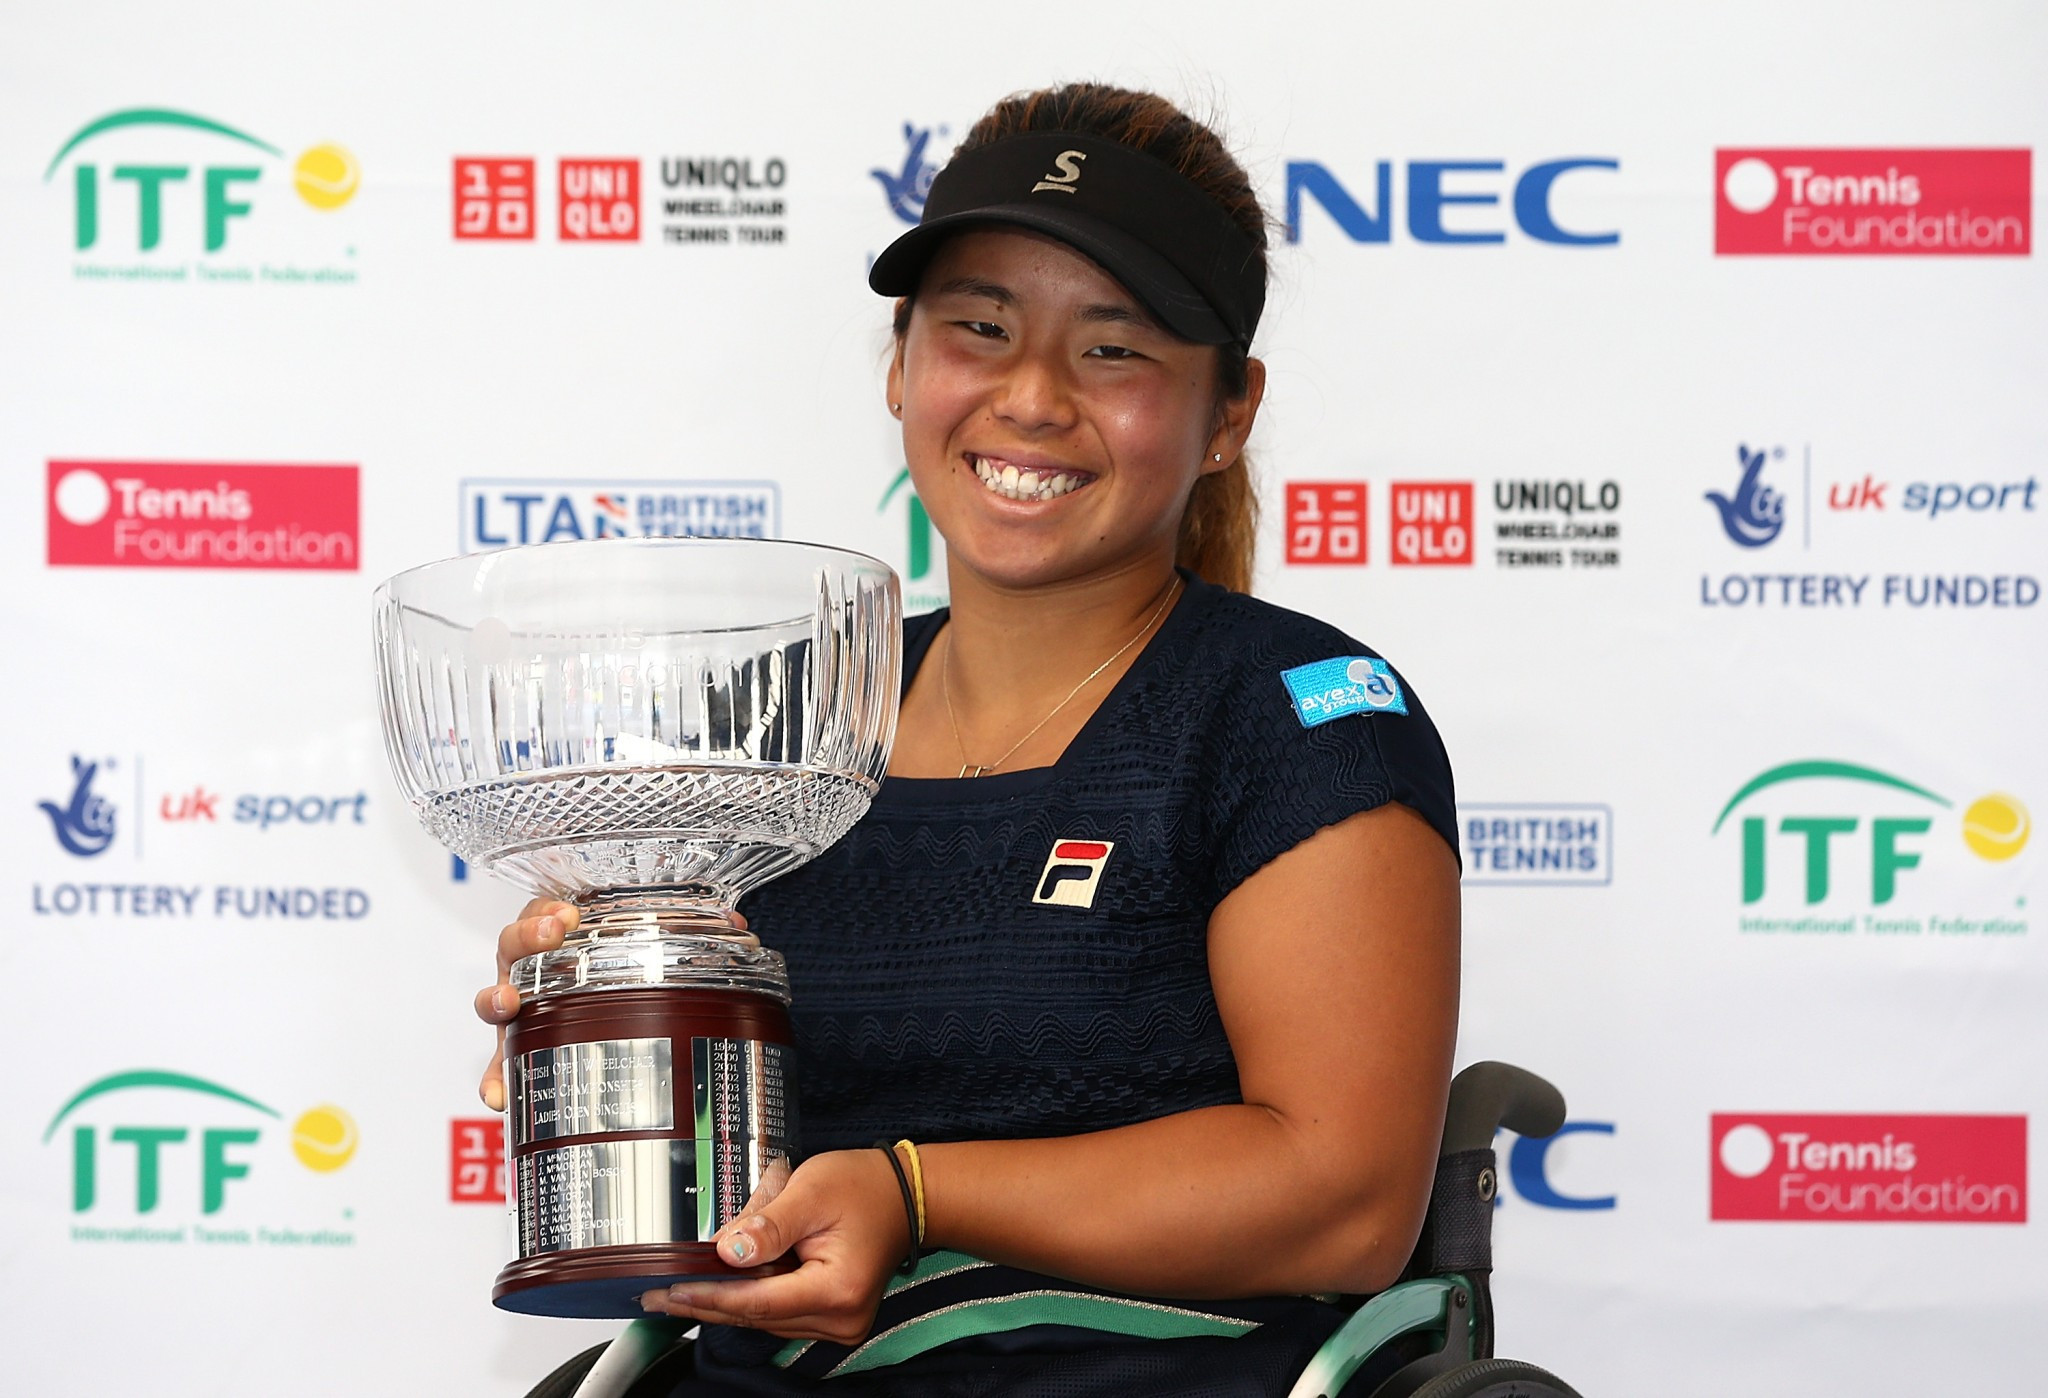 Yui Kamiji has stayed in first place of the ITF wheelchair tennis women's rankings ©Getty Images